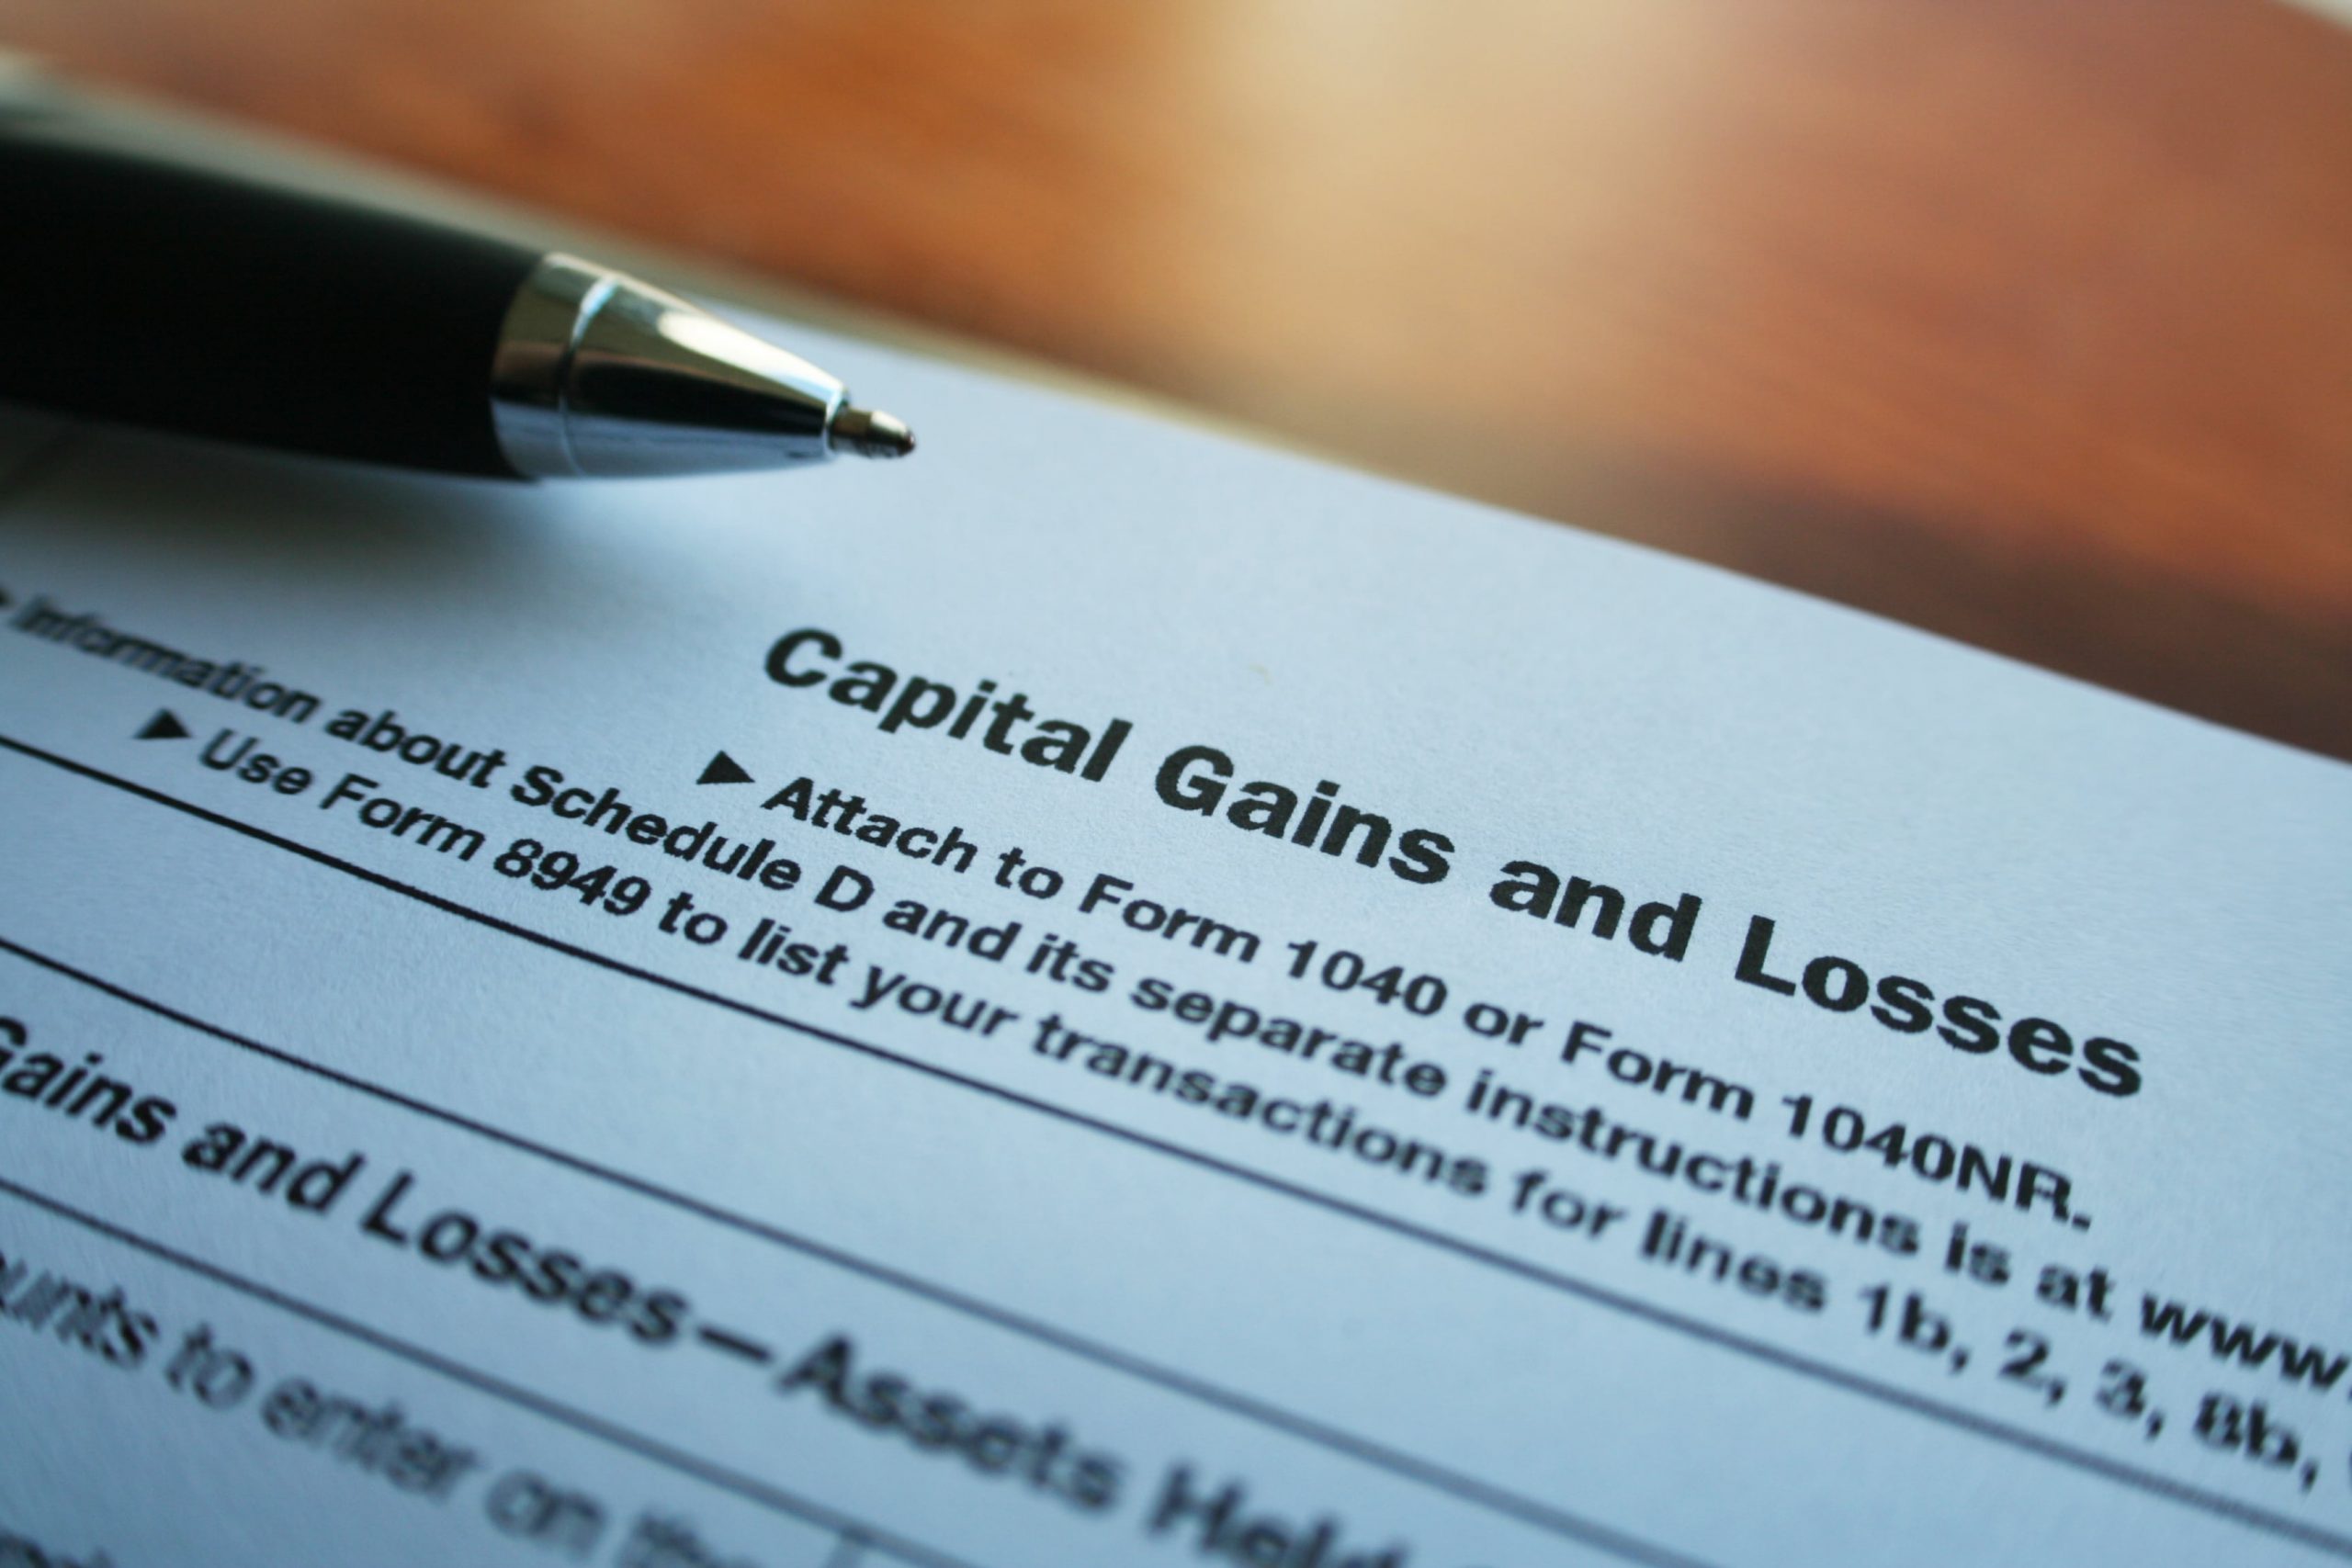 net unrealized appreciation (NUA) and capital gains and losses